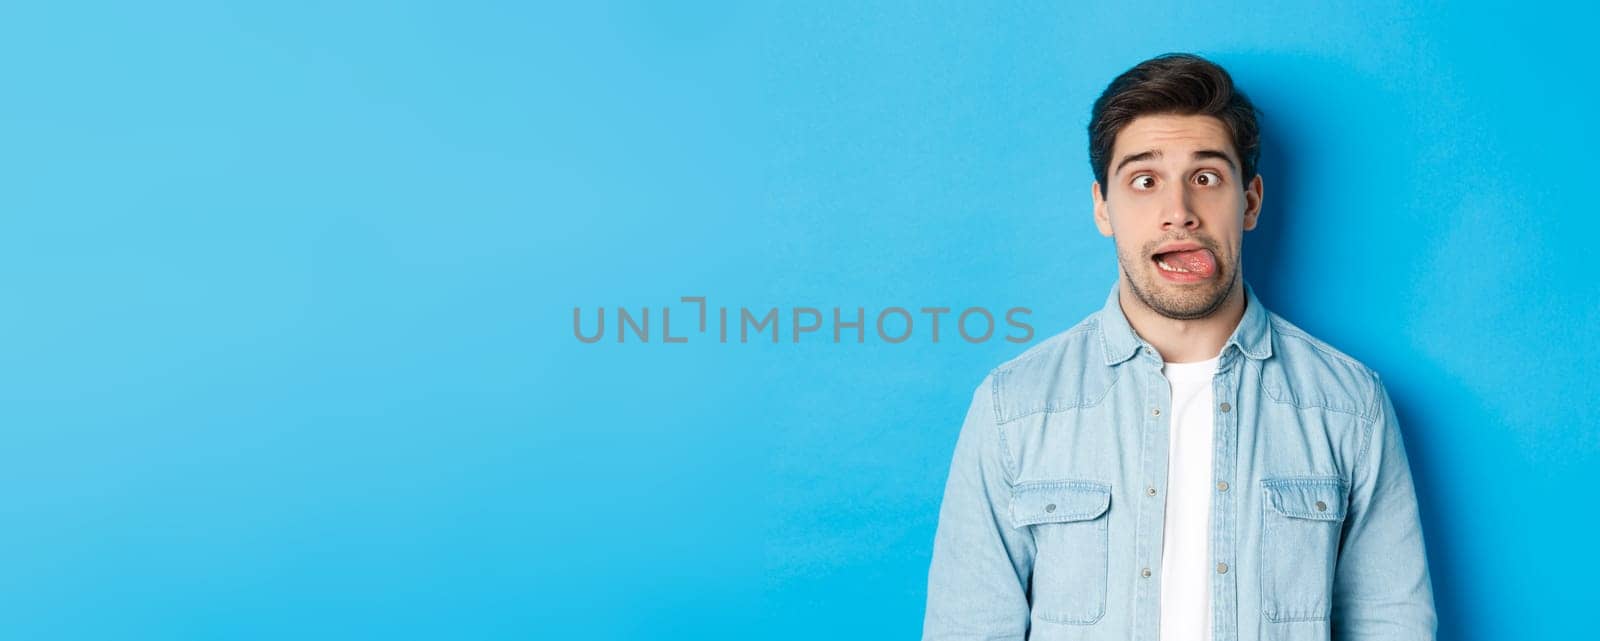 Close-up of young man making funny expressions, showing tongue and looking at camera, standing over blue background. Copy space